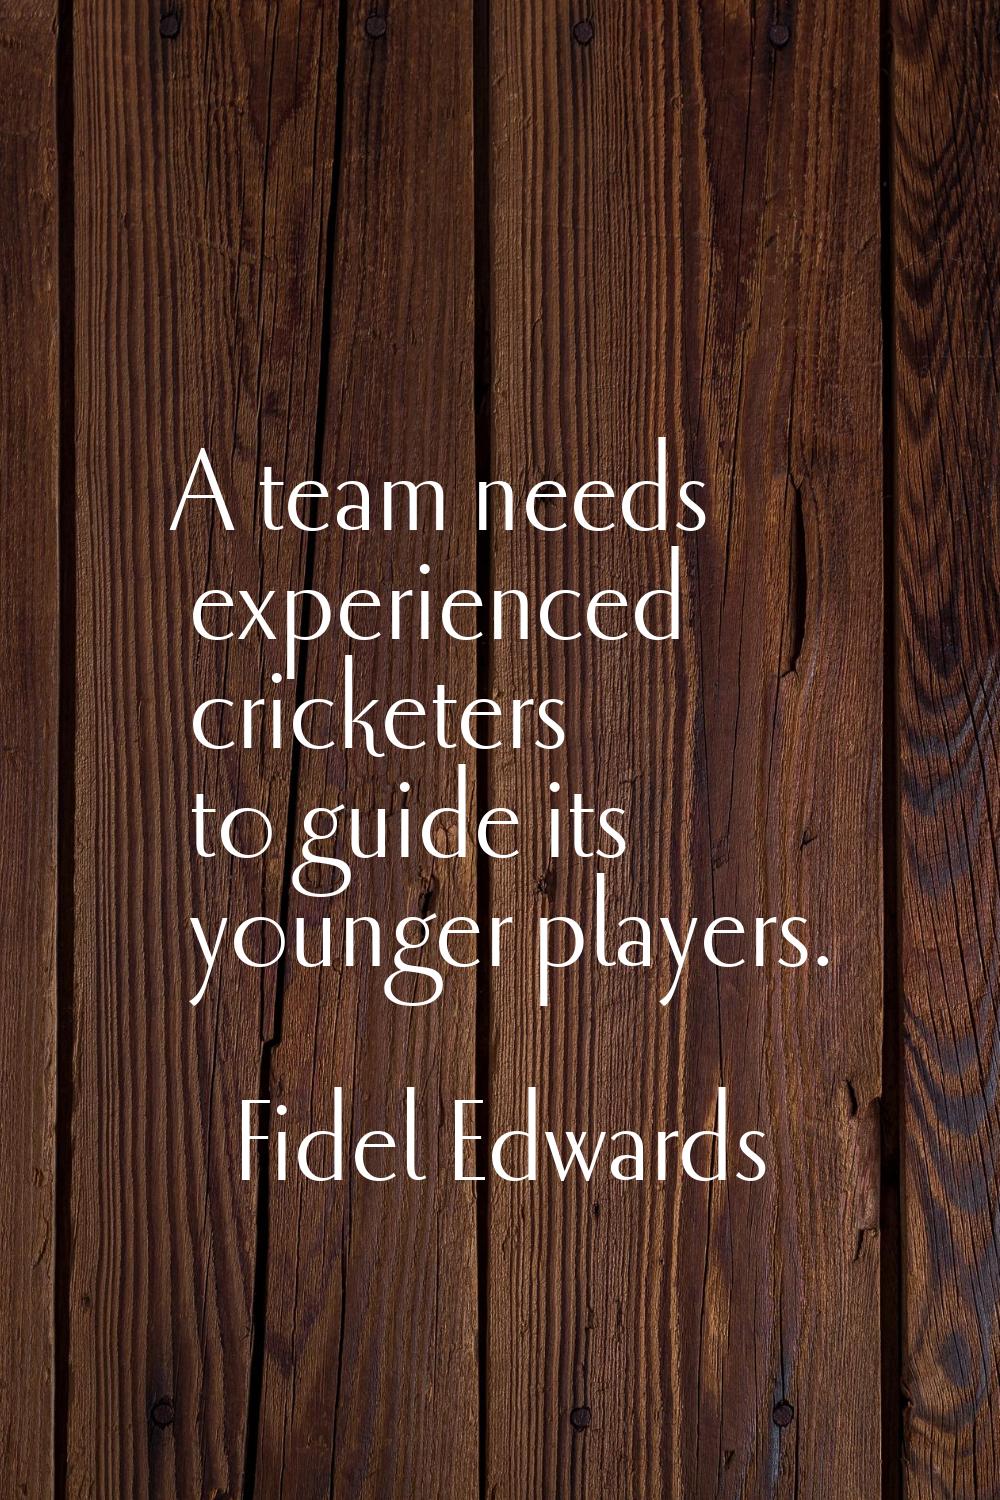 A team needs experienced cricketers to guide its younger players.